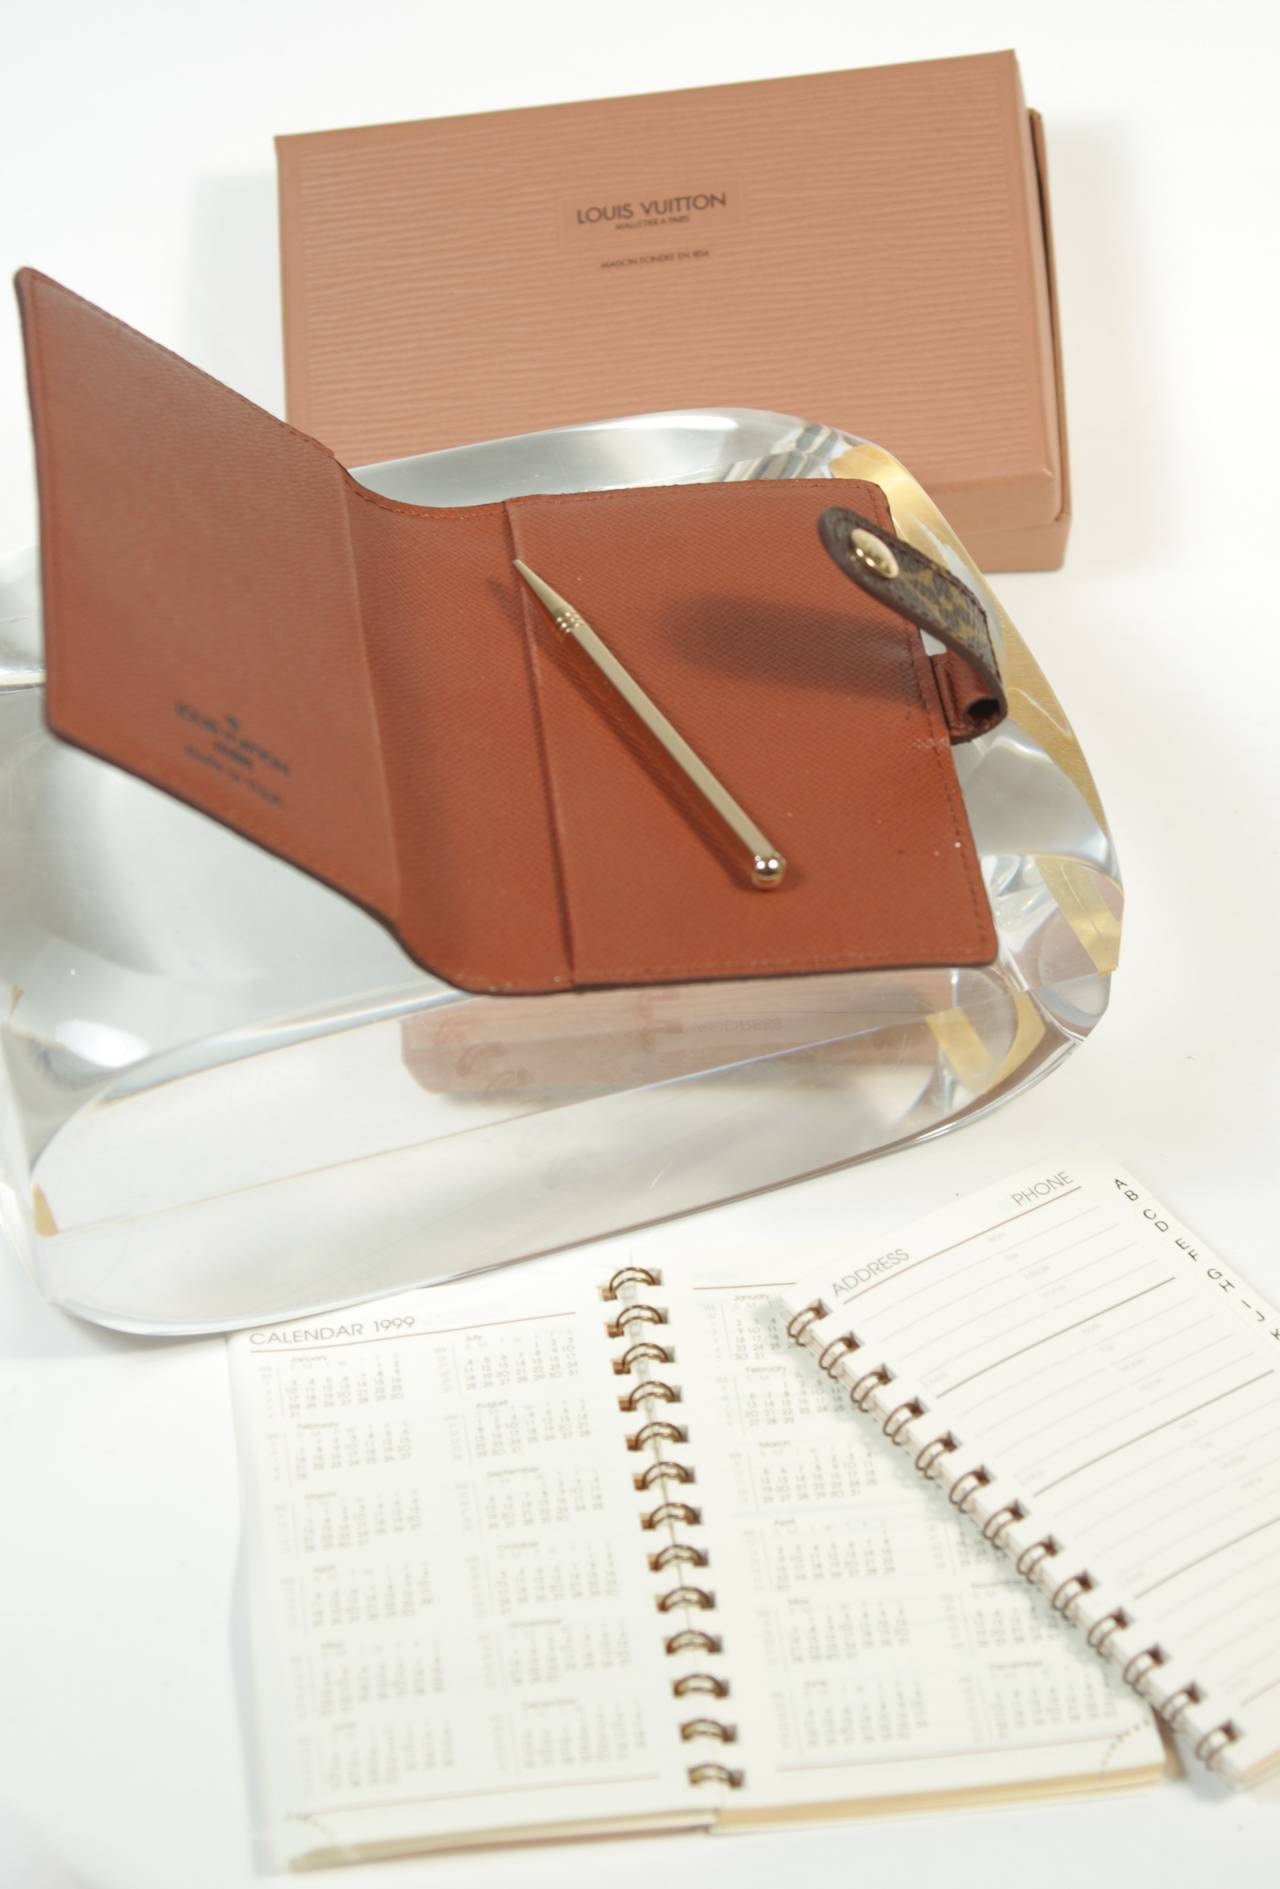 Louis Vuitton Small Monogram Agenda with Pencil and Original Box 1999 at 1stdibs